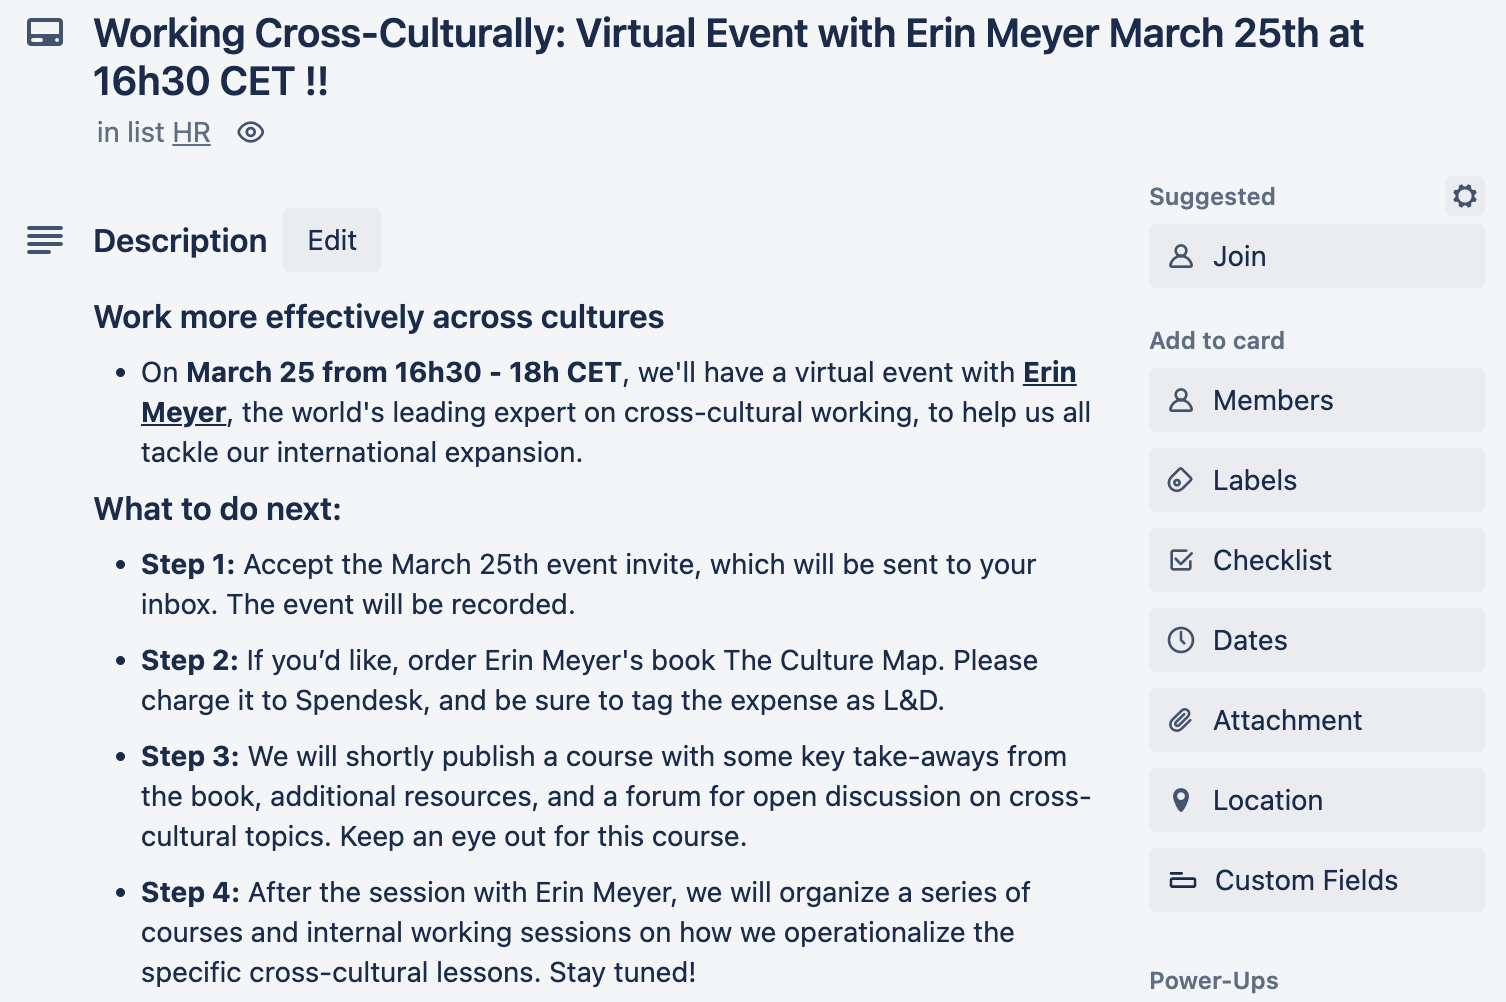 An announcement of our cross-cultural training on Trello